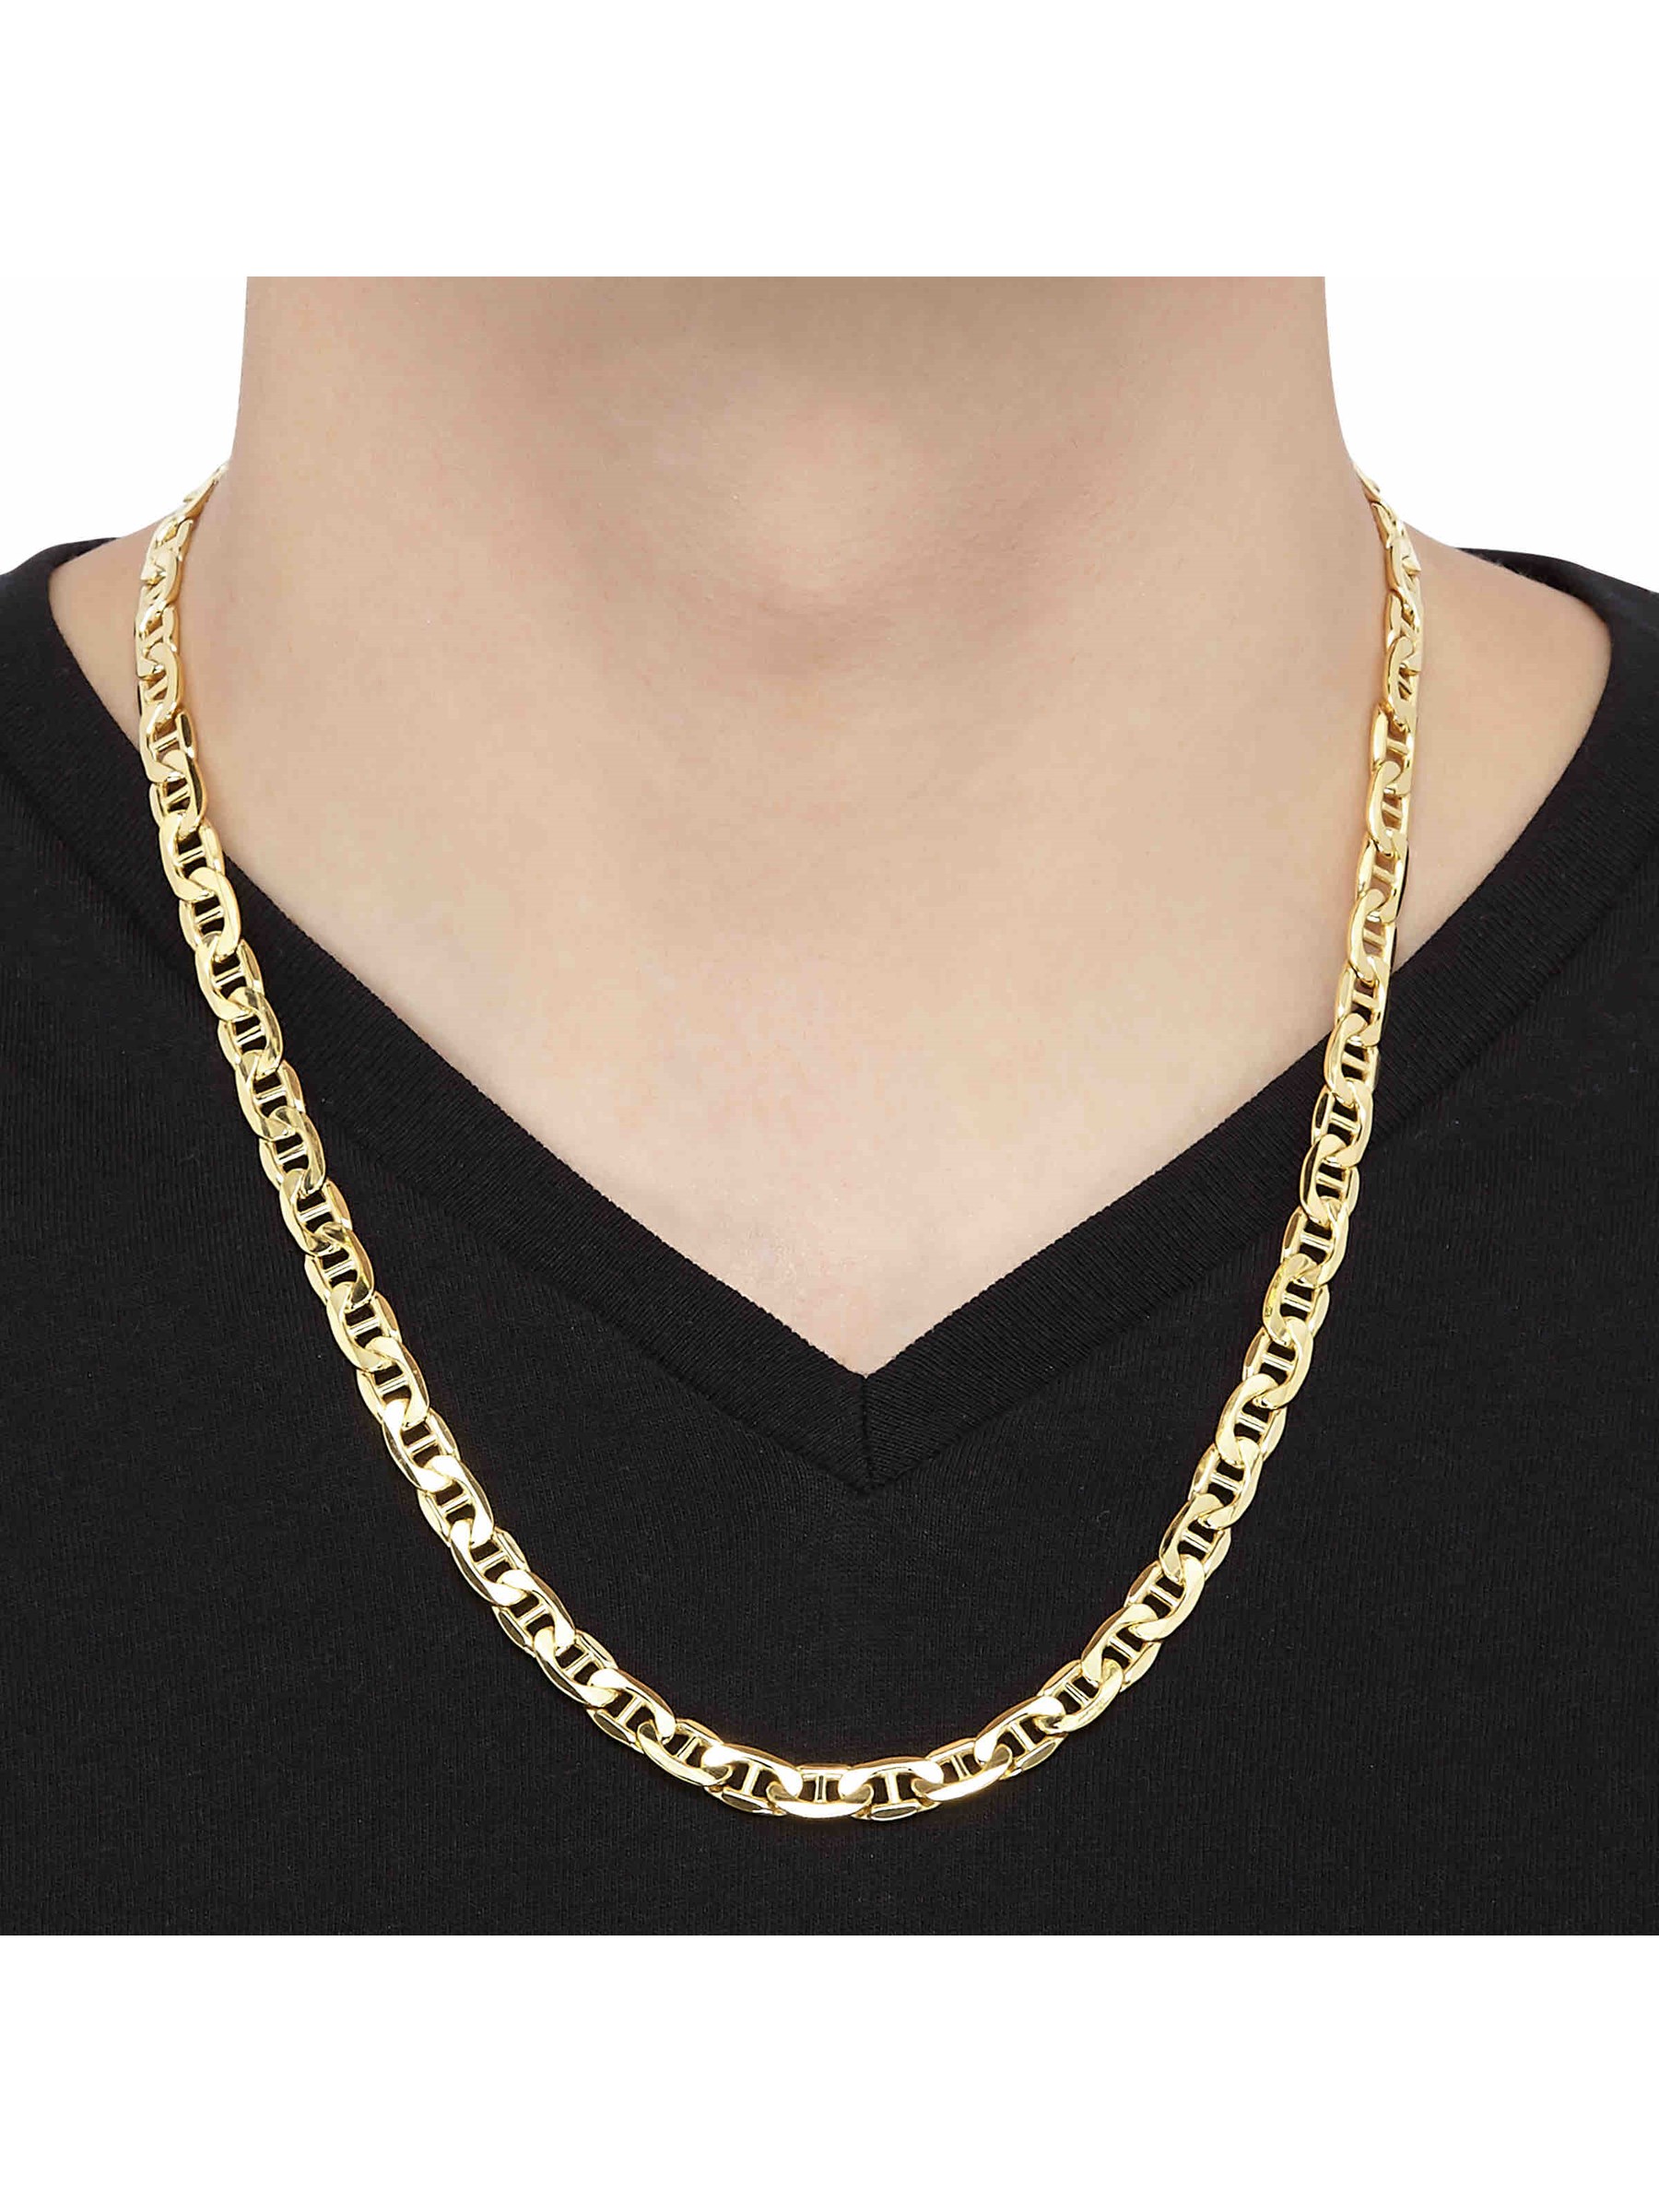 Welry Men's Italian-Made 7.2mm Beveled Mariner Link Chain Necklace in 10kt Yellow Gold, 22" - image 2 of 4